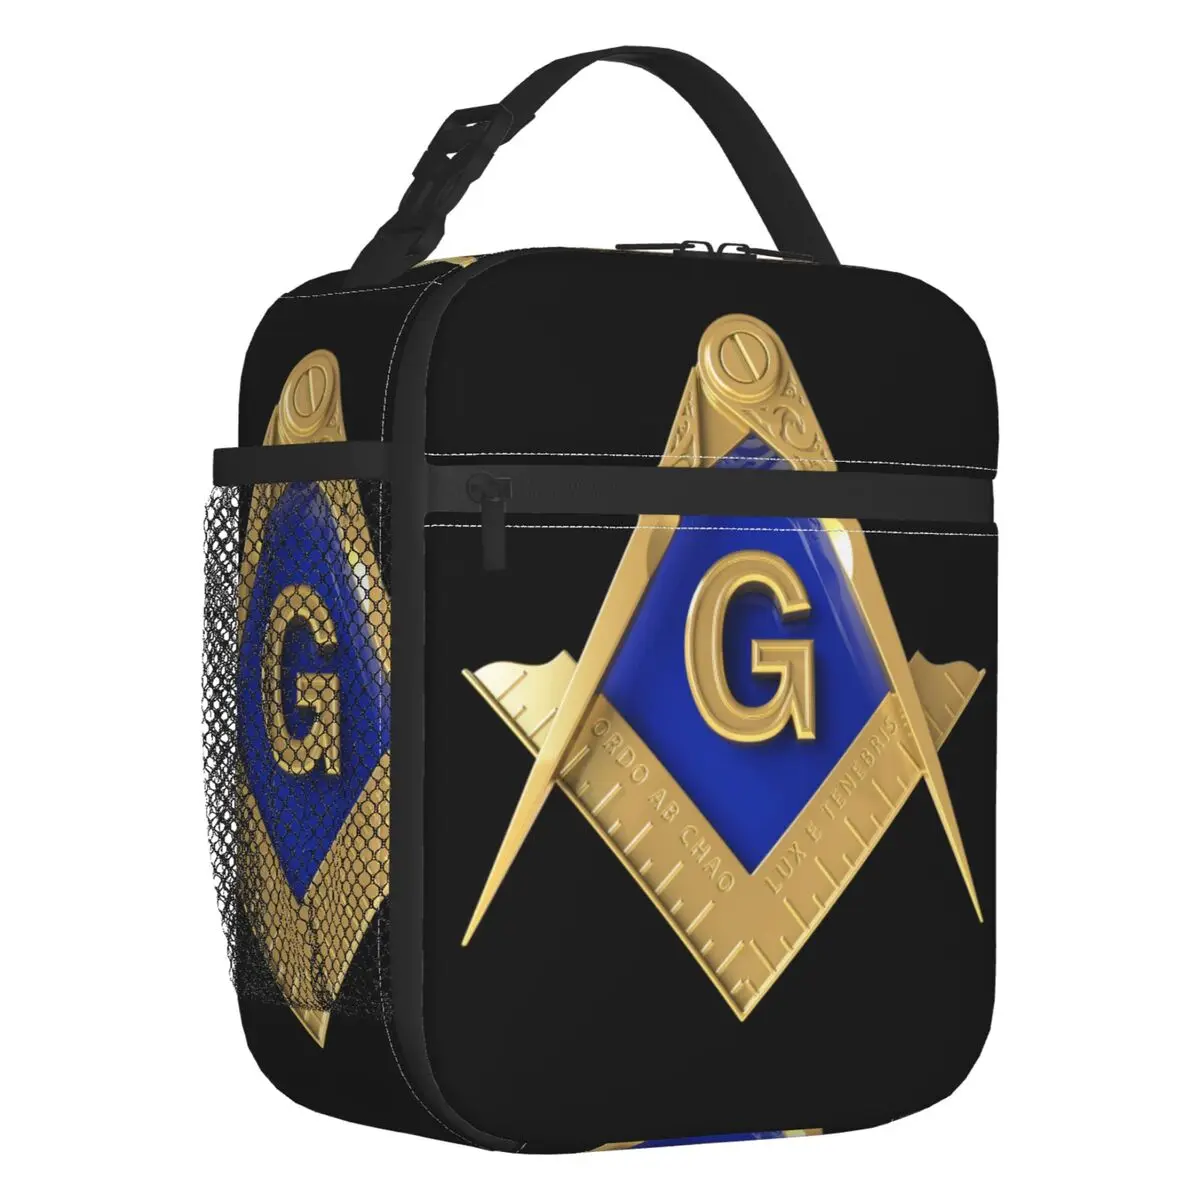 Custom Gold Square Compass Masonic Freemason Lunch Bag Men Women Cooler Warm Insulated Lunch Boxes for Student School